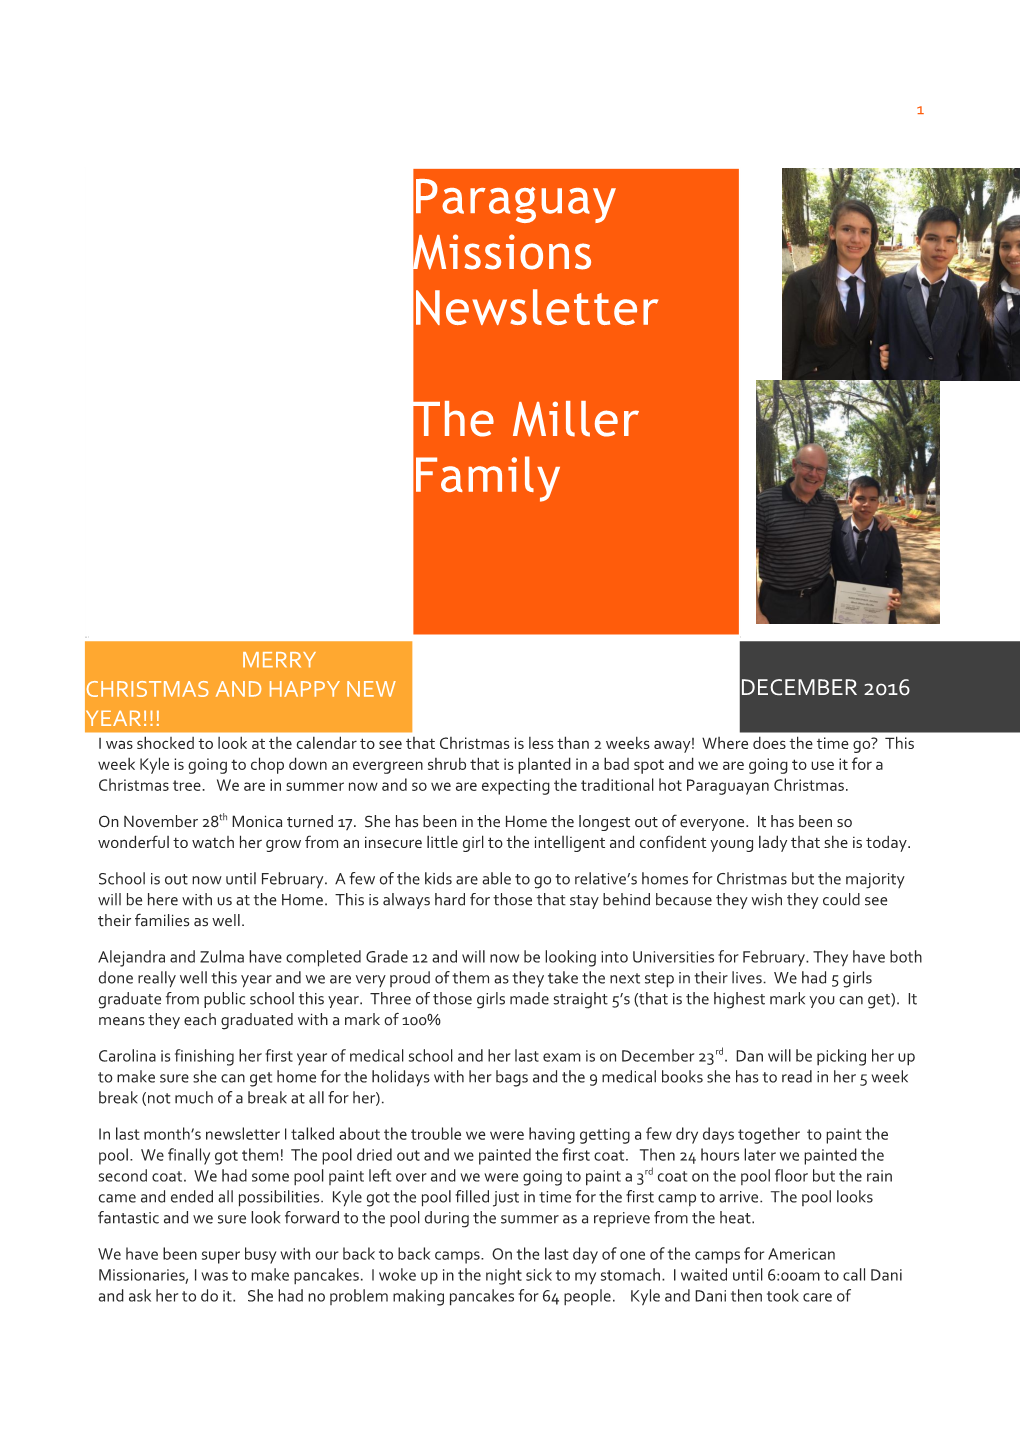 Paraguay Missions Newsletter the Miller Family